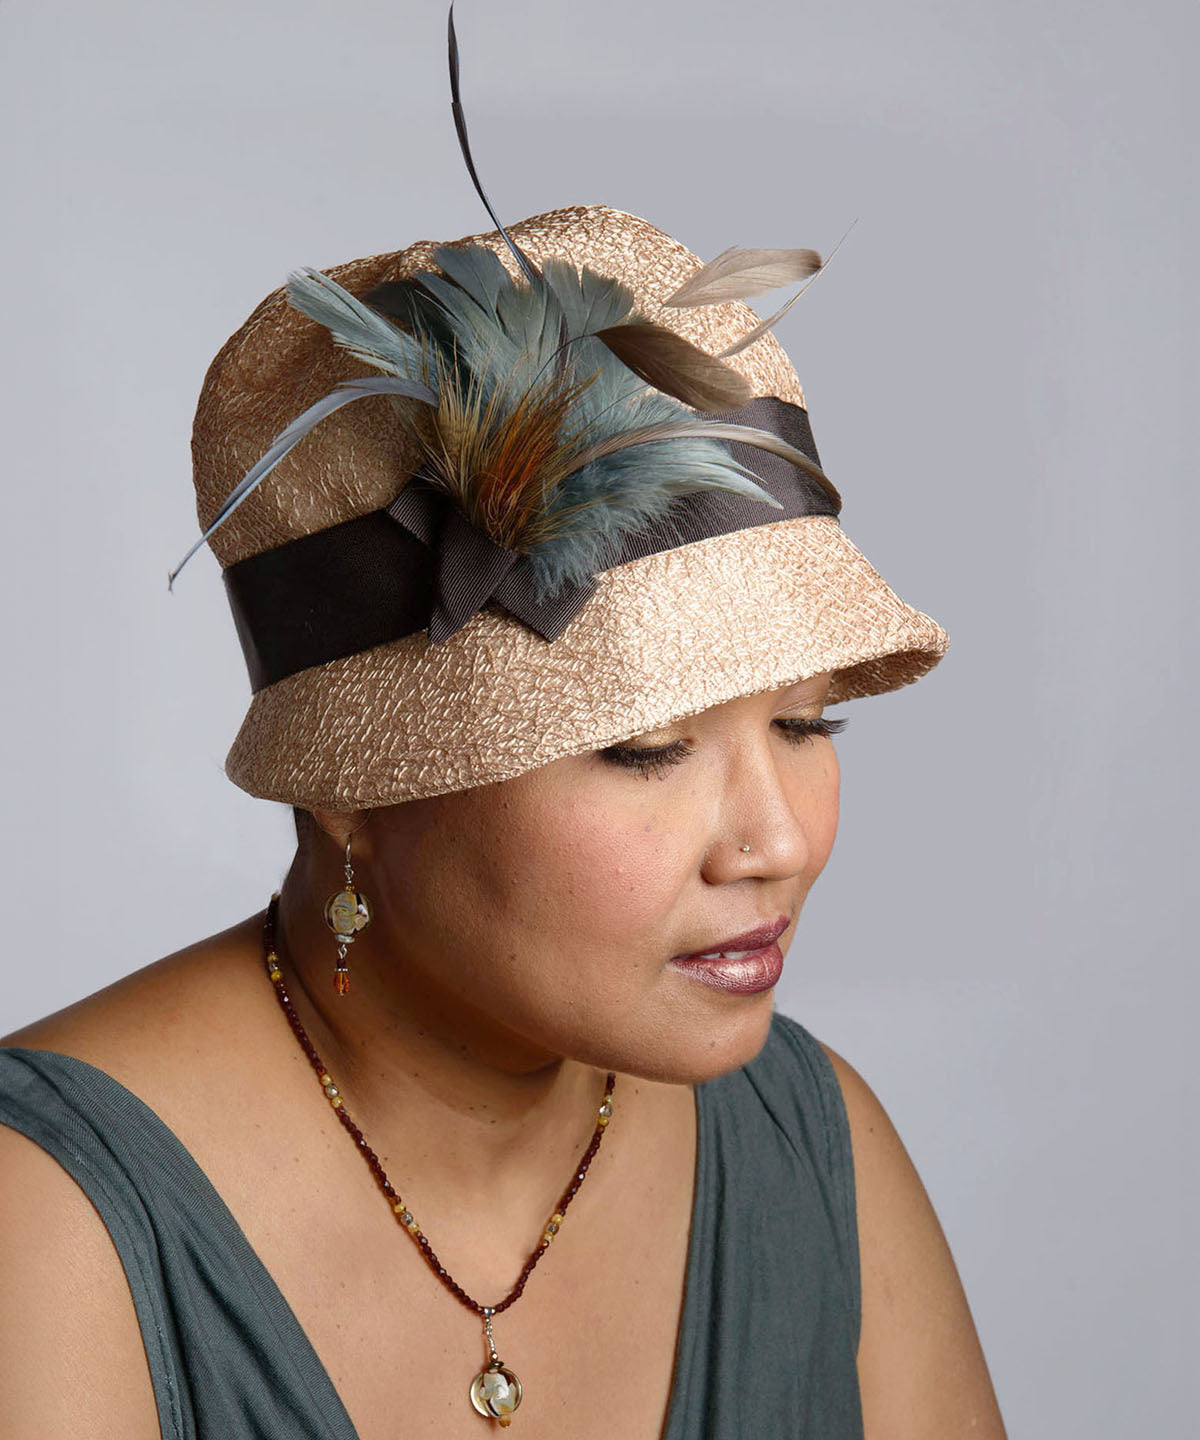 Grace Cloche Style Hat Tumbleweed in Champagne with Chocolate Grosgrain featuring Steel and Pheasant Feather Brooch | By Pandemonium Millinery | Handmade in Seattle WA USA